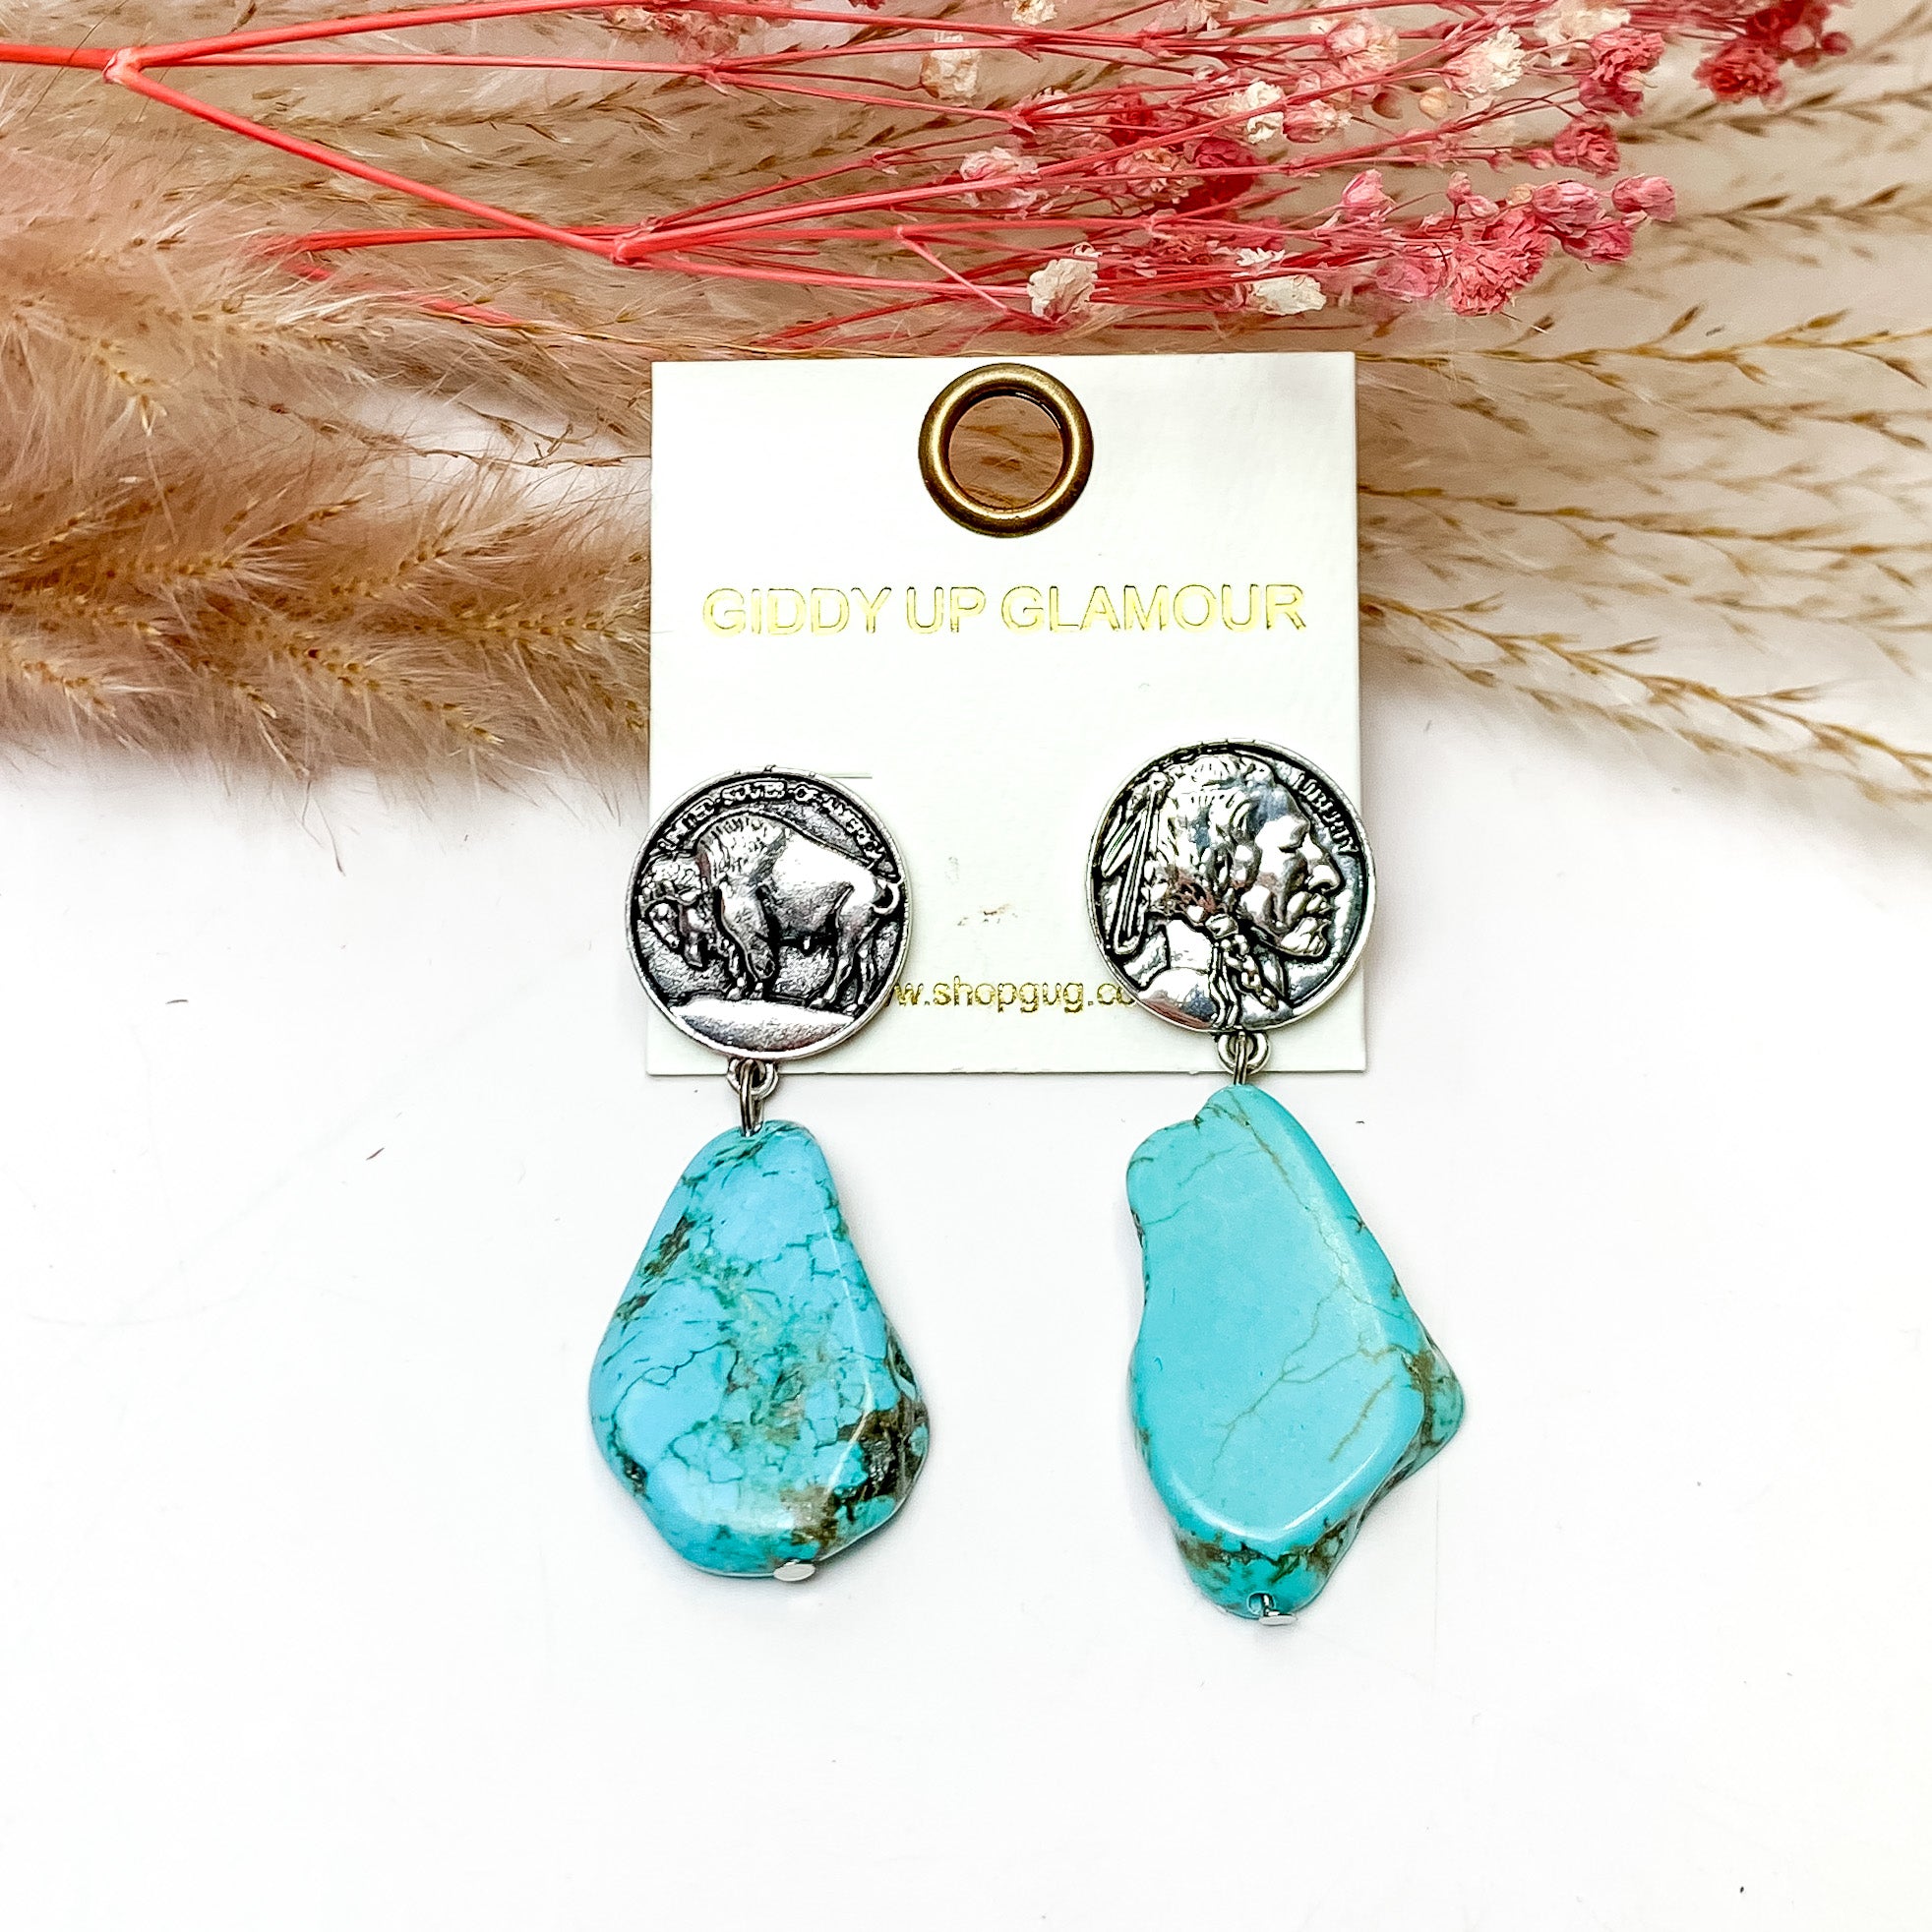 Turquoise Stone Earrings With Silver Tone Coin Posts. These earrings are pictured on a white background with flowers behind for decoration.